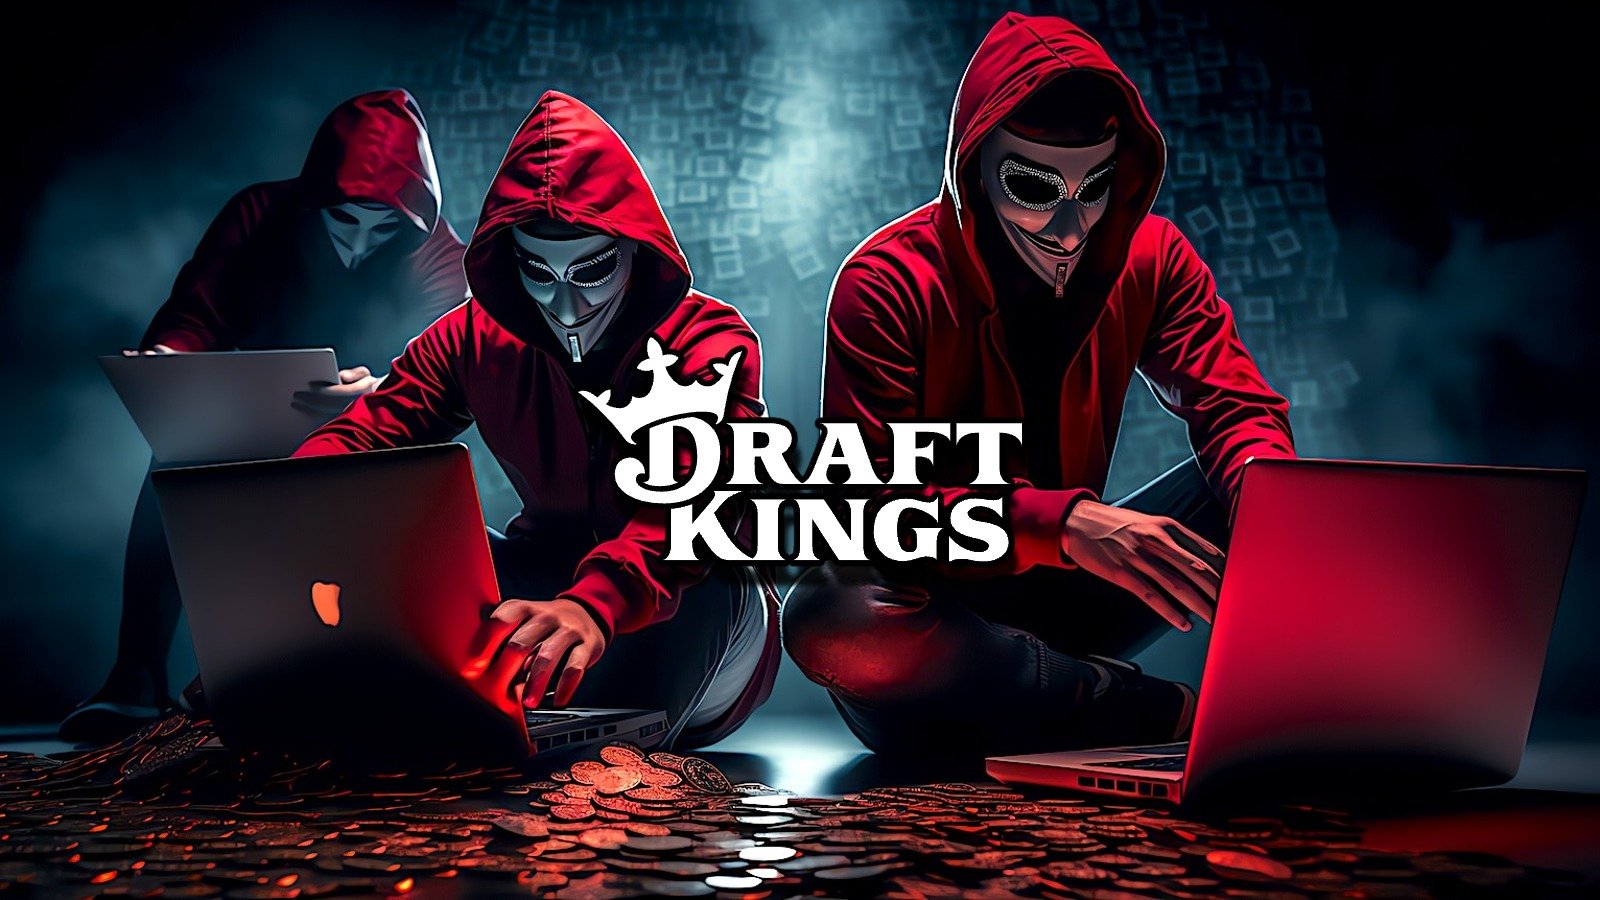 US charges two more suspects with DraftKing account hacks